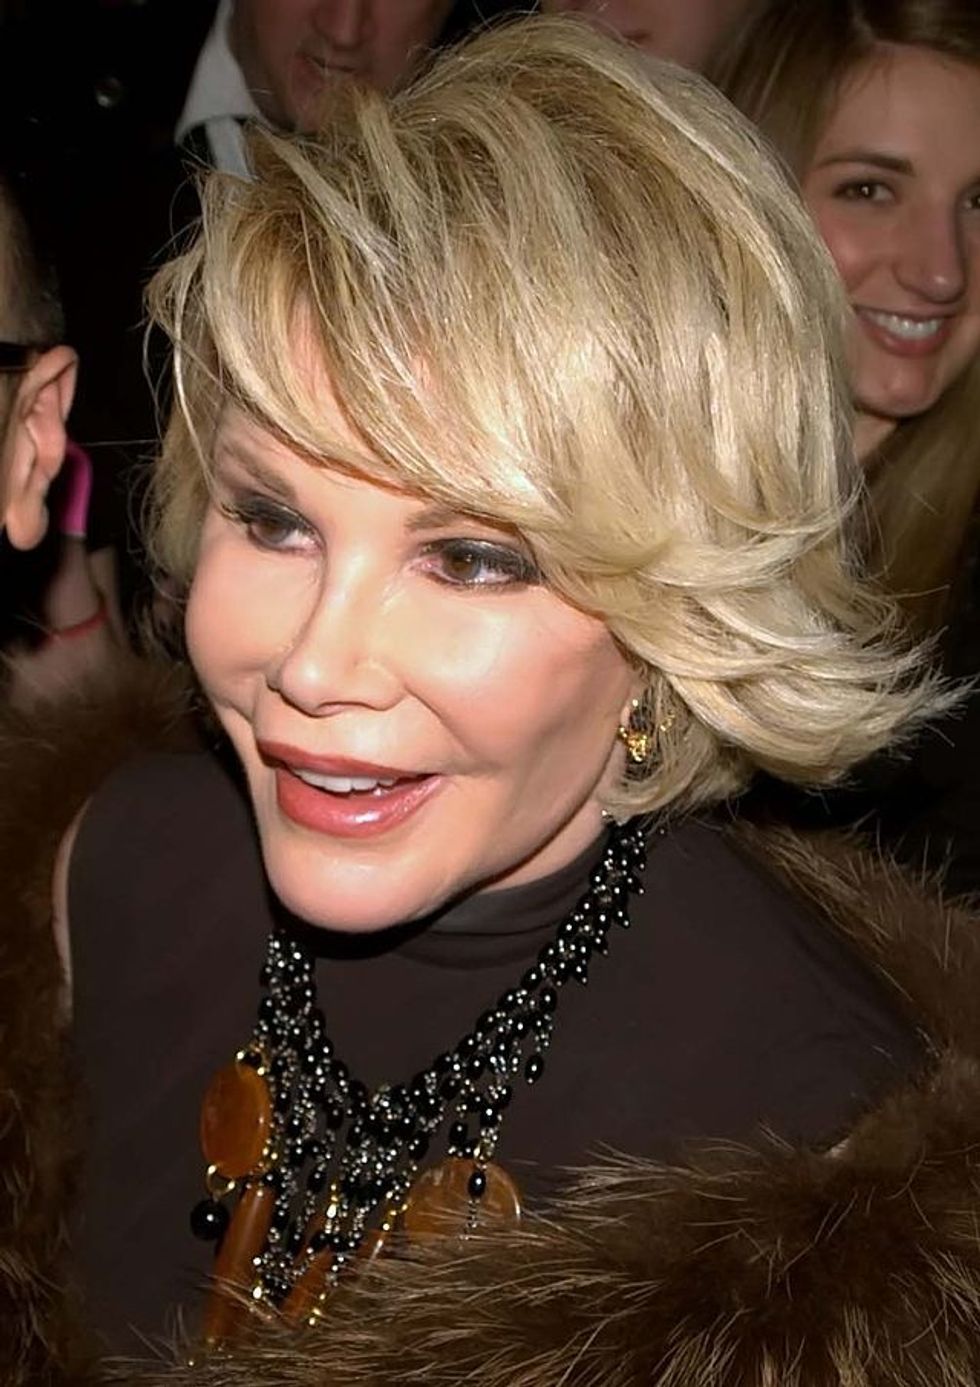 Joan Rivers Remains On Life Support; ‘Fashion Police’ On 2-Week Hold